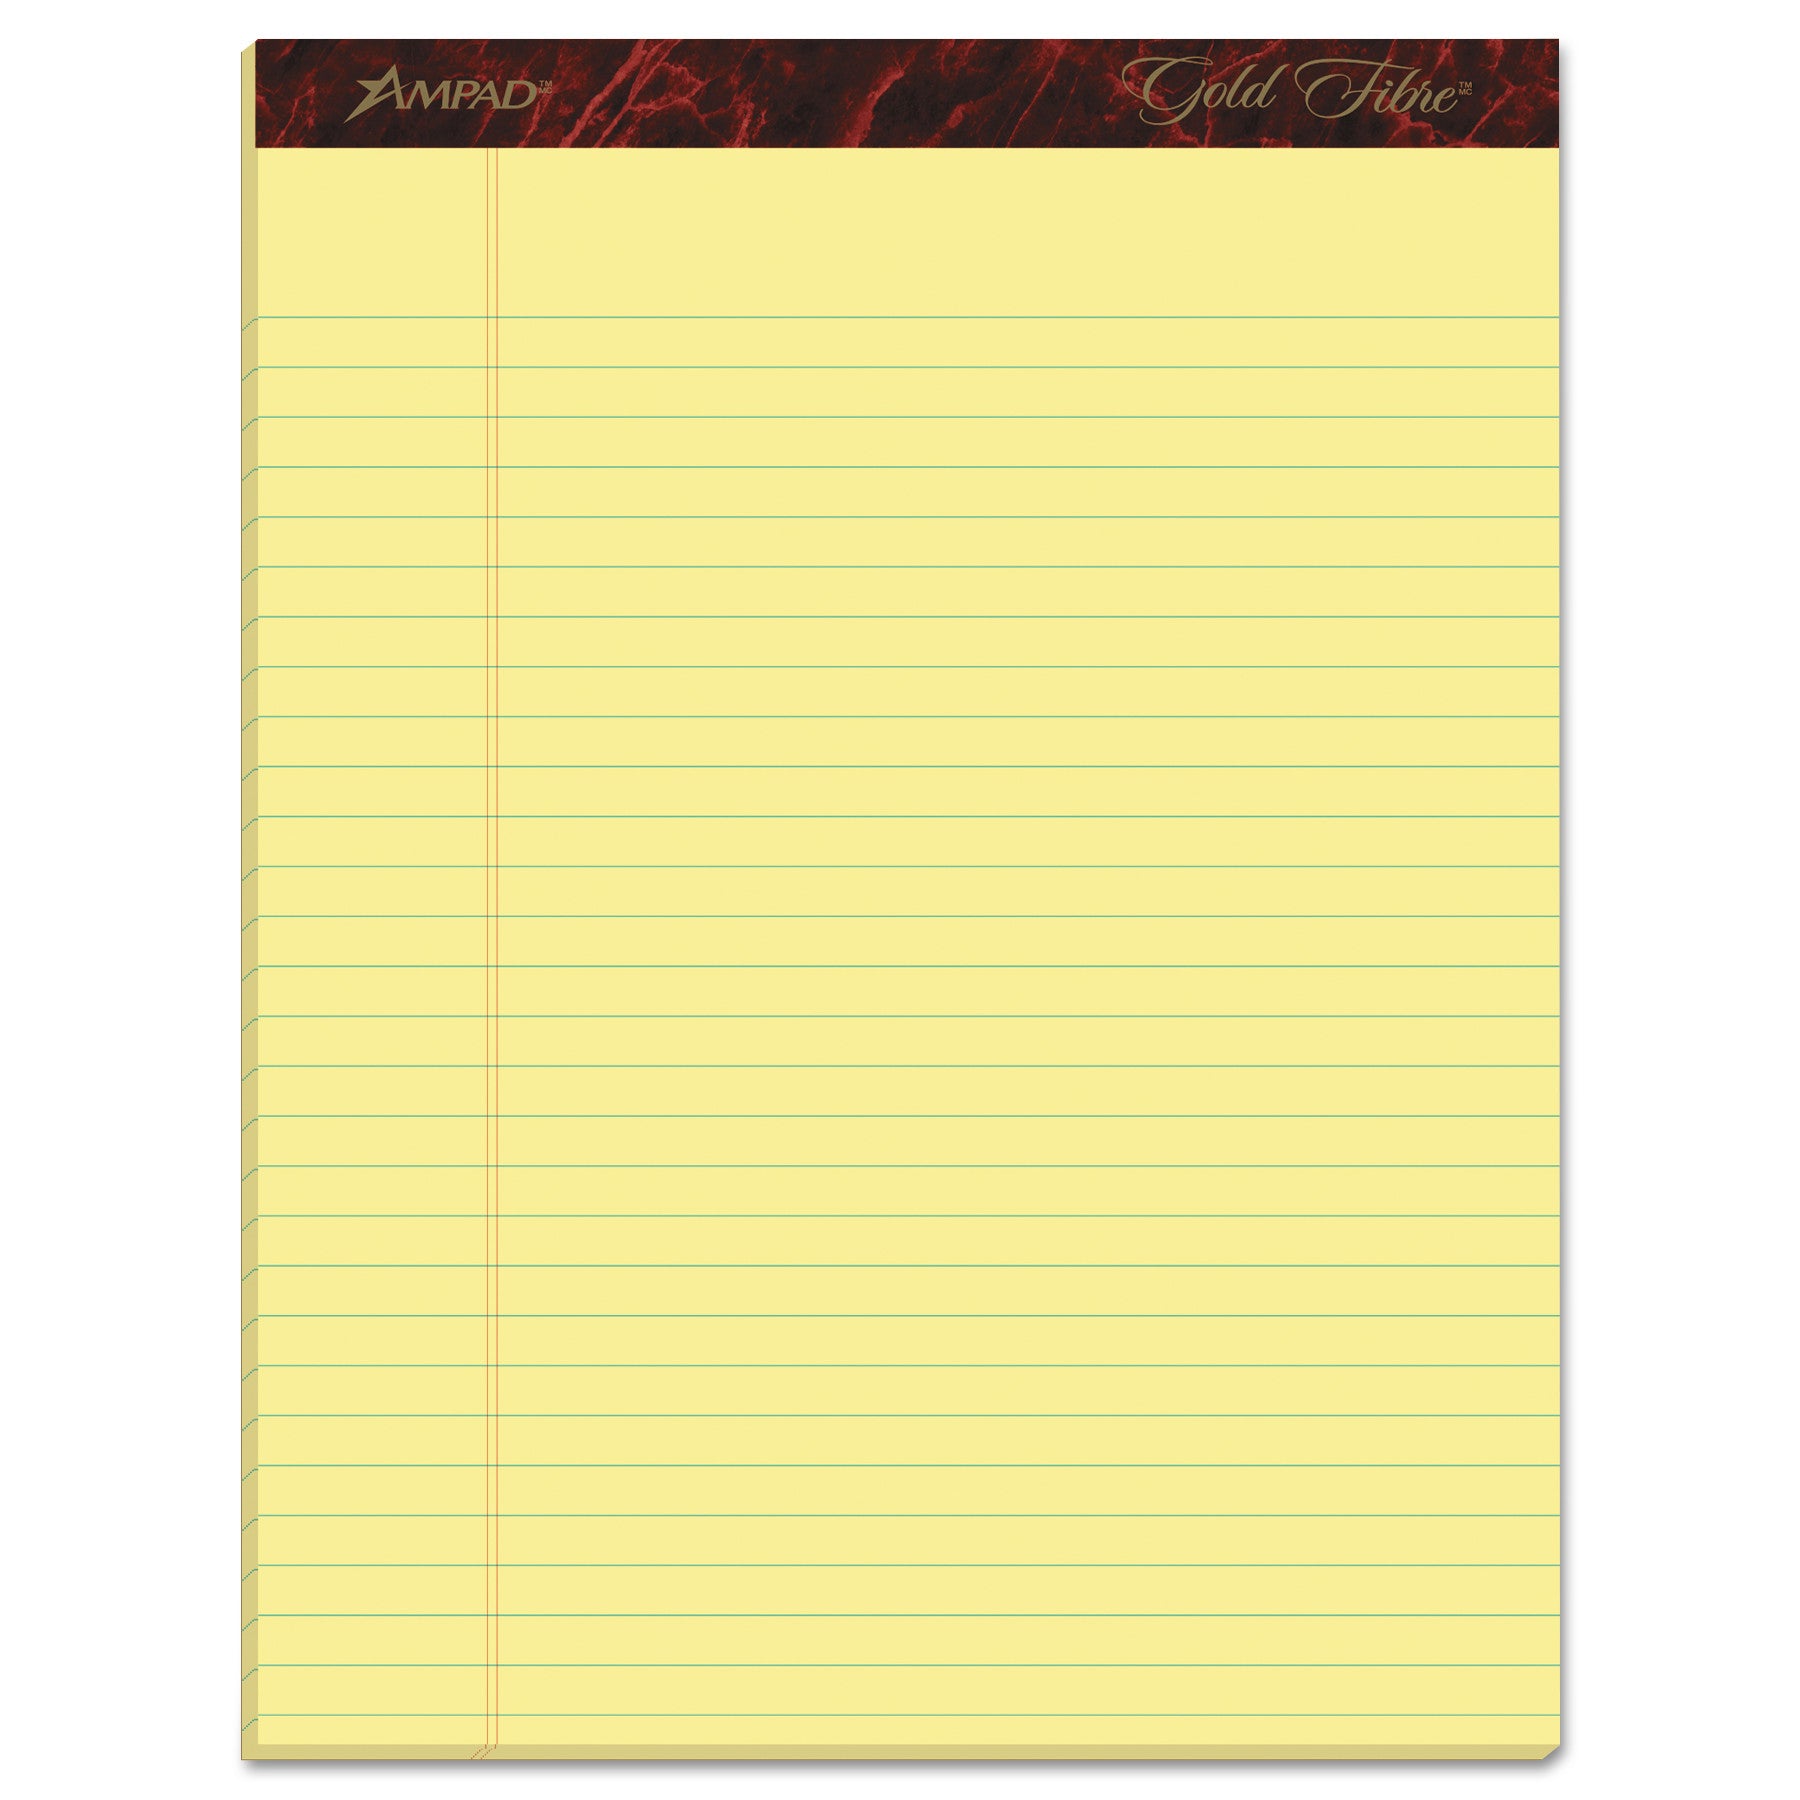 Gold Fibre Quality Writing Pads, Wide/Legal Rule, 50 Canary-Yellow 8.5 x 11.75 Sheets, Dozen - 